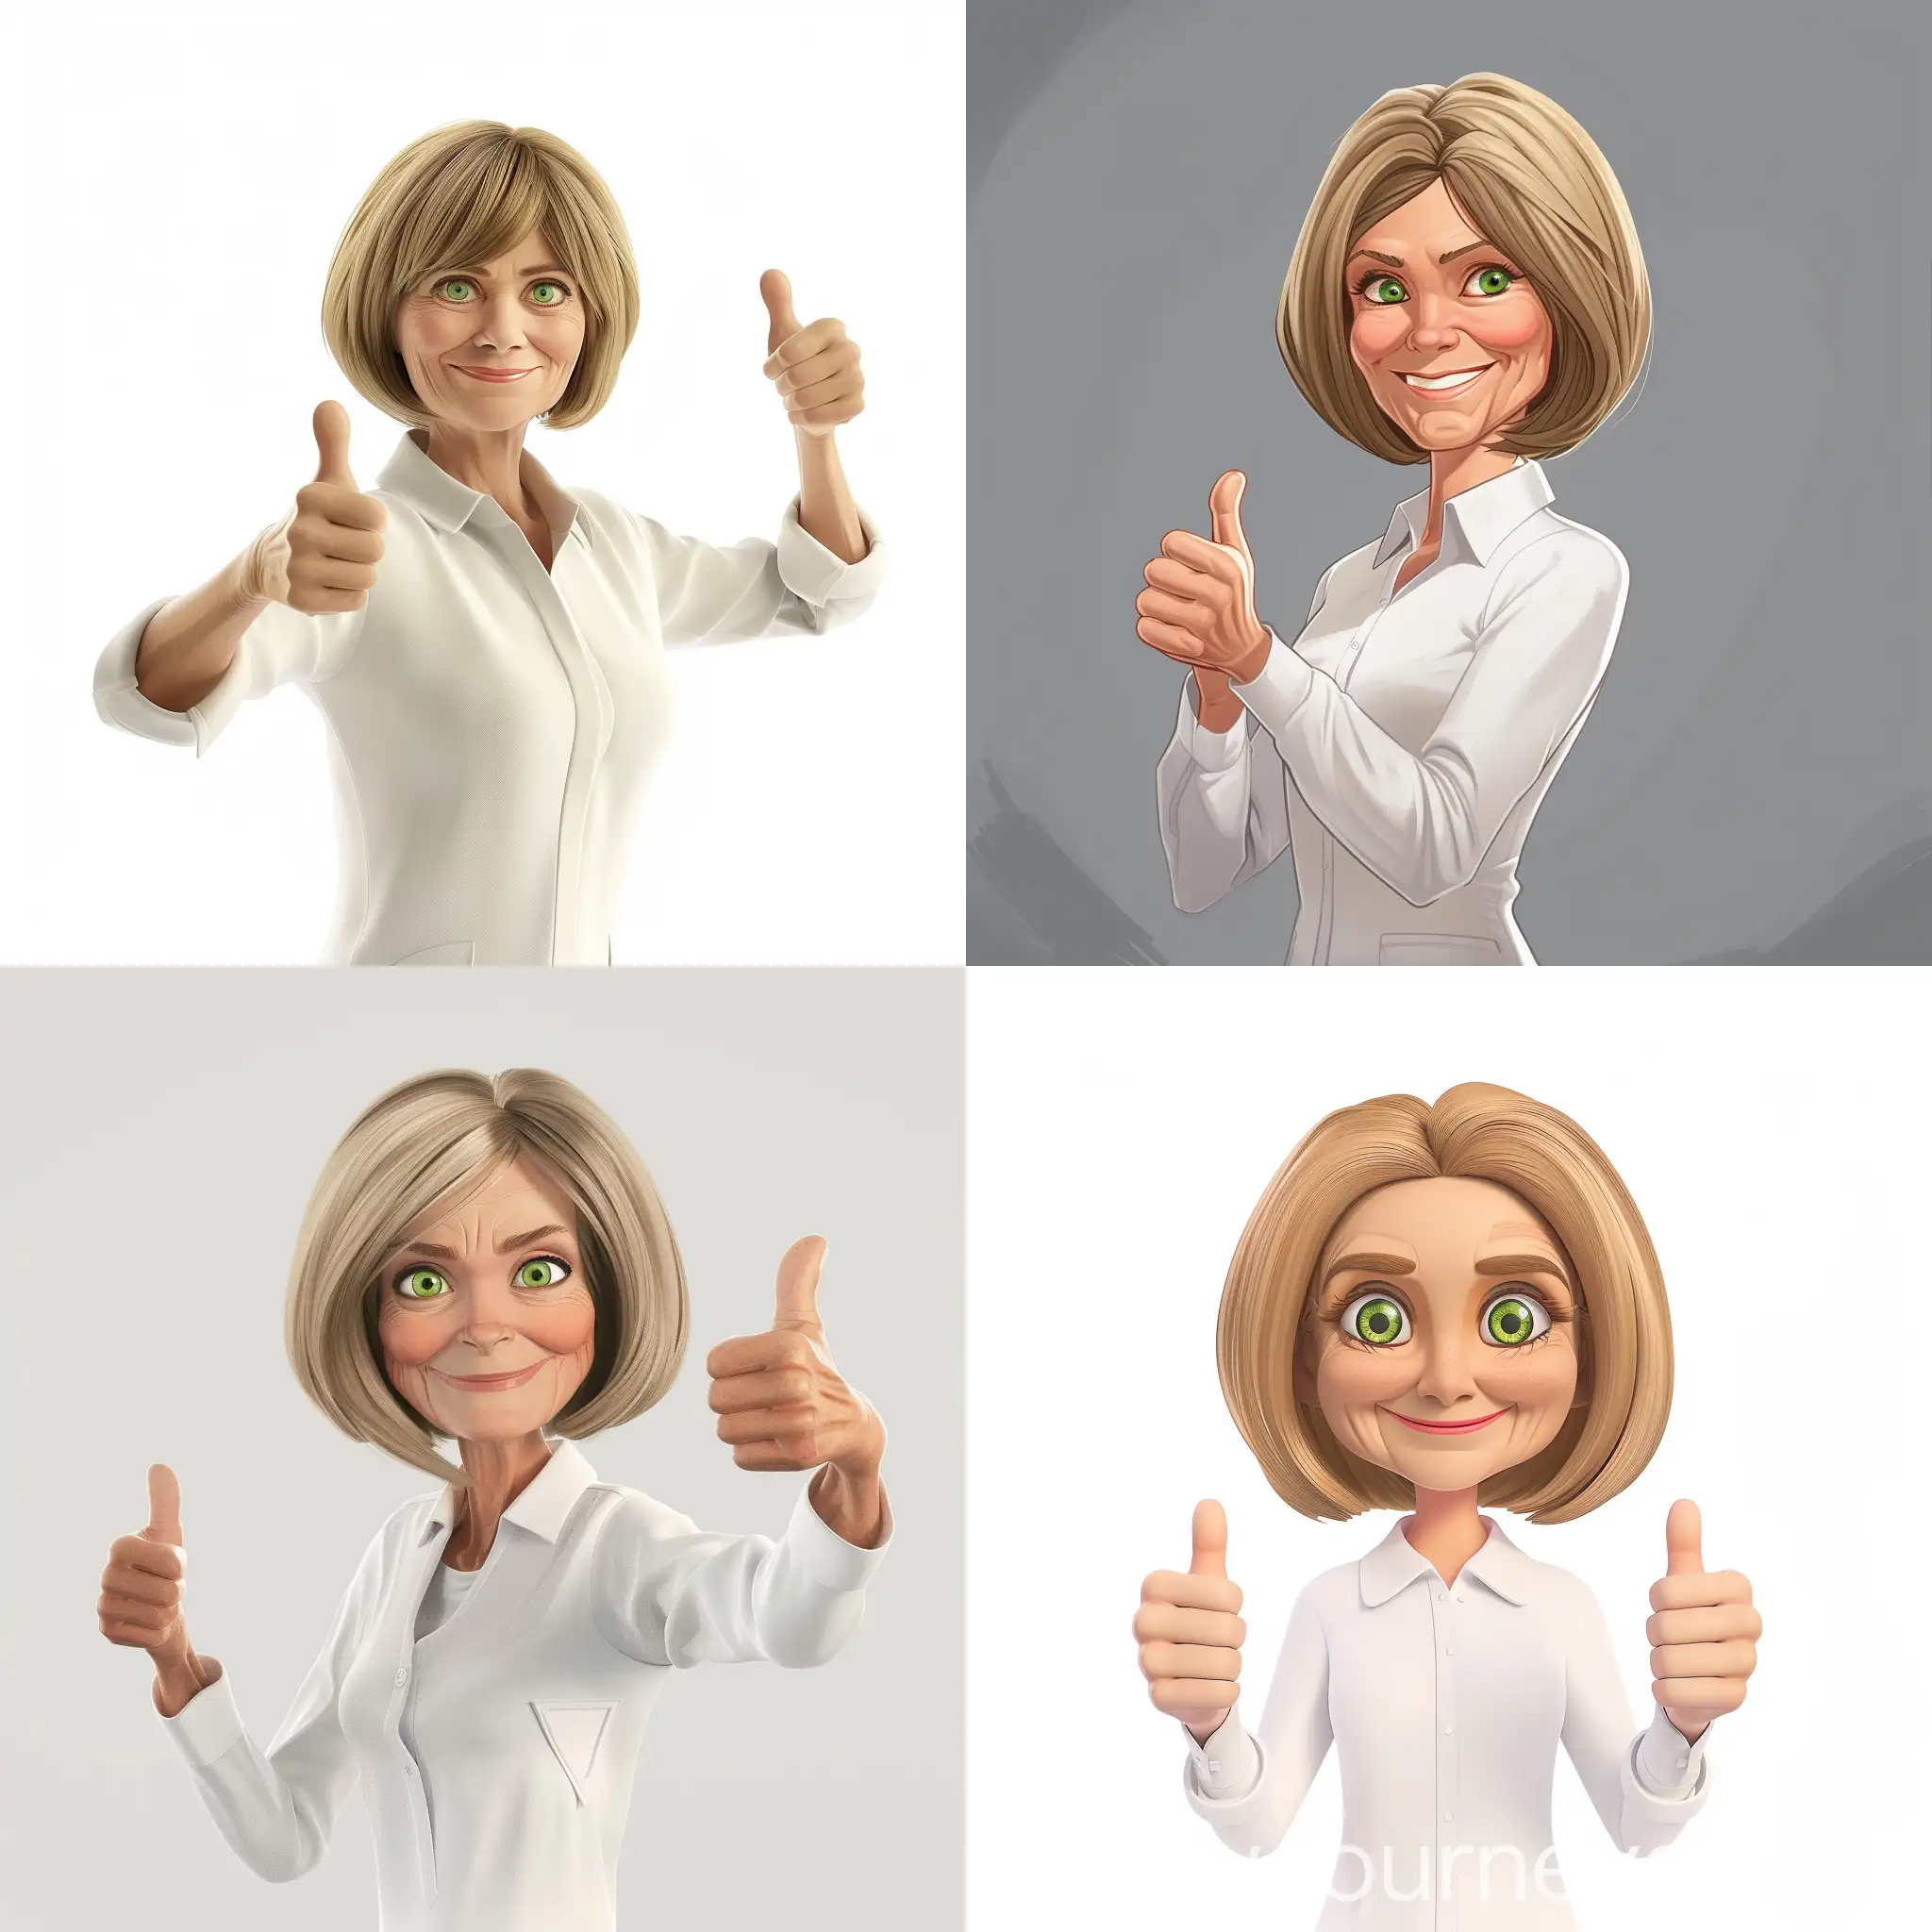 MiddleAged-Woman-with-Blonde-Bob-Hair-Giving-Thumbs-Up-in-Pixar-Style